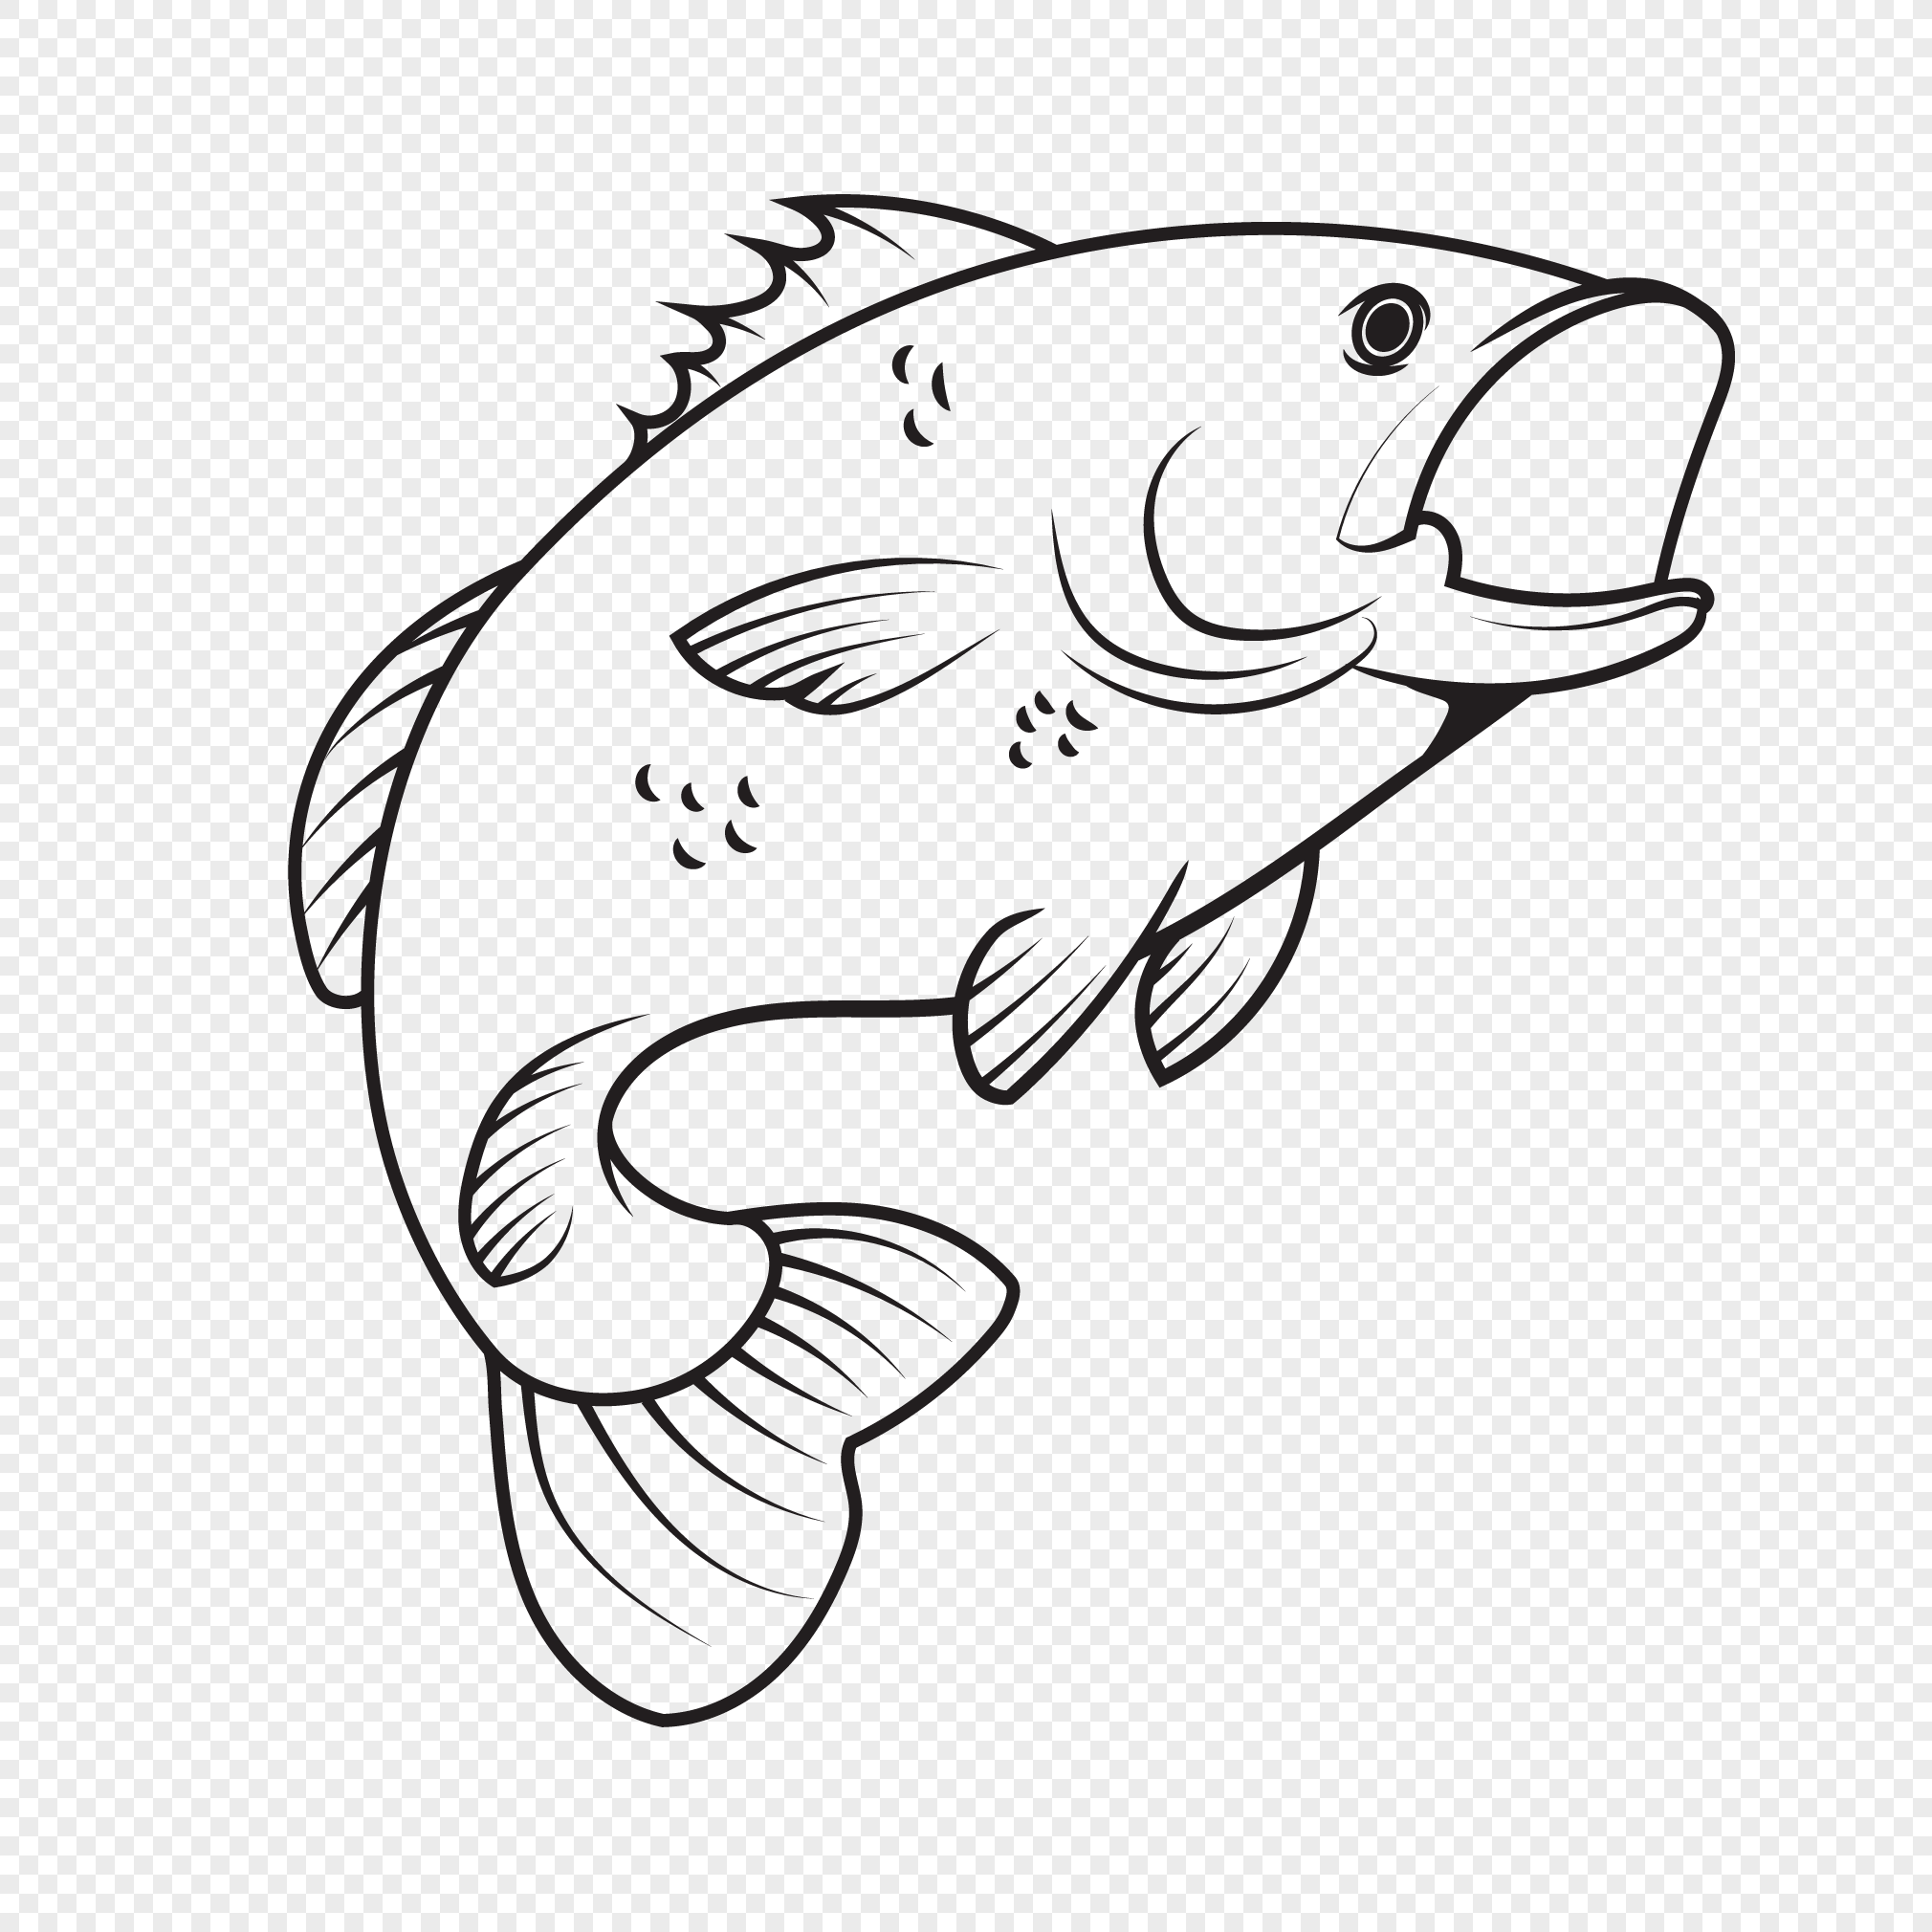 Hand drawn black and white line drawing fish vector elements png image